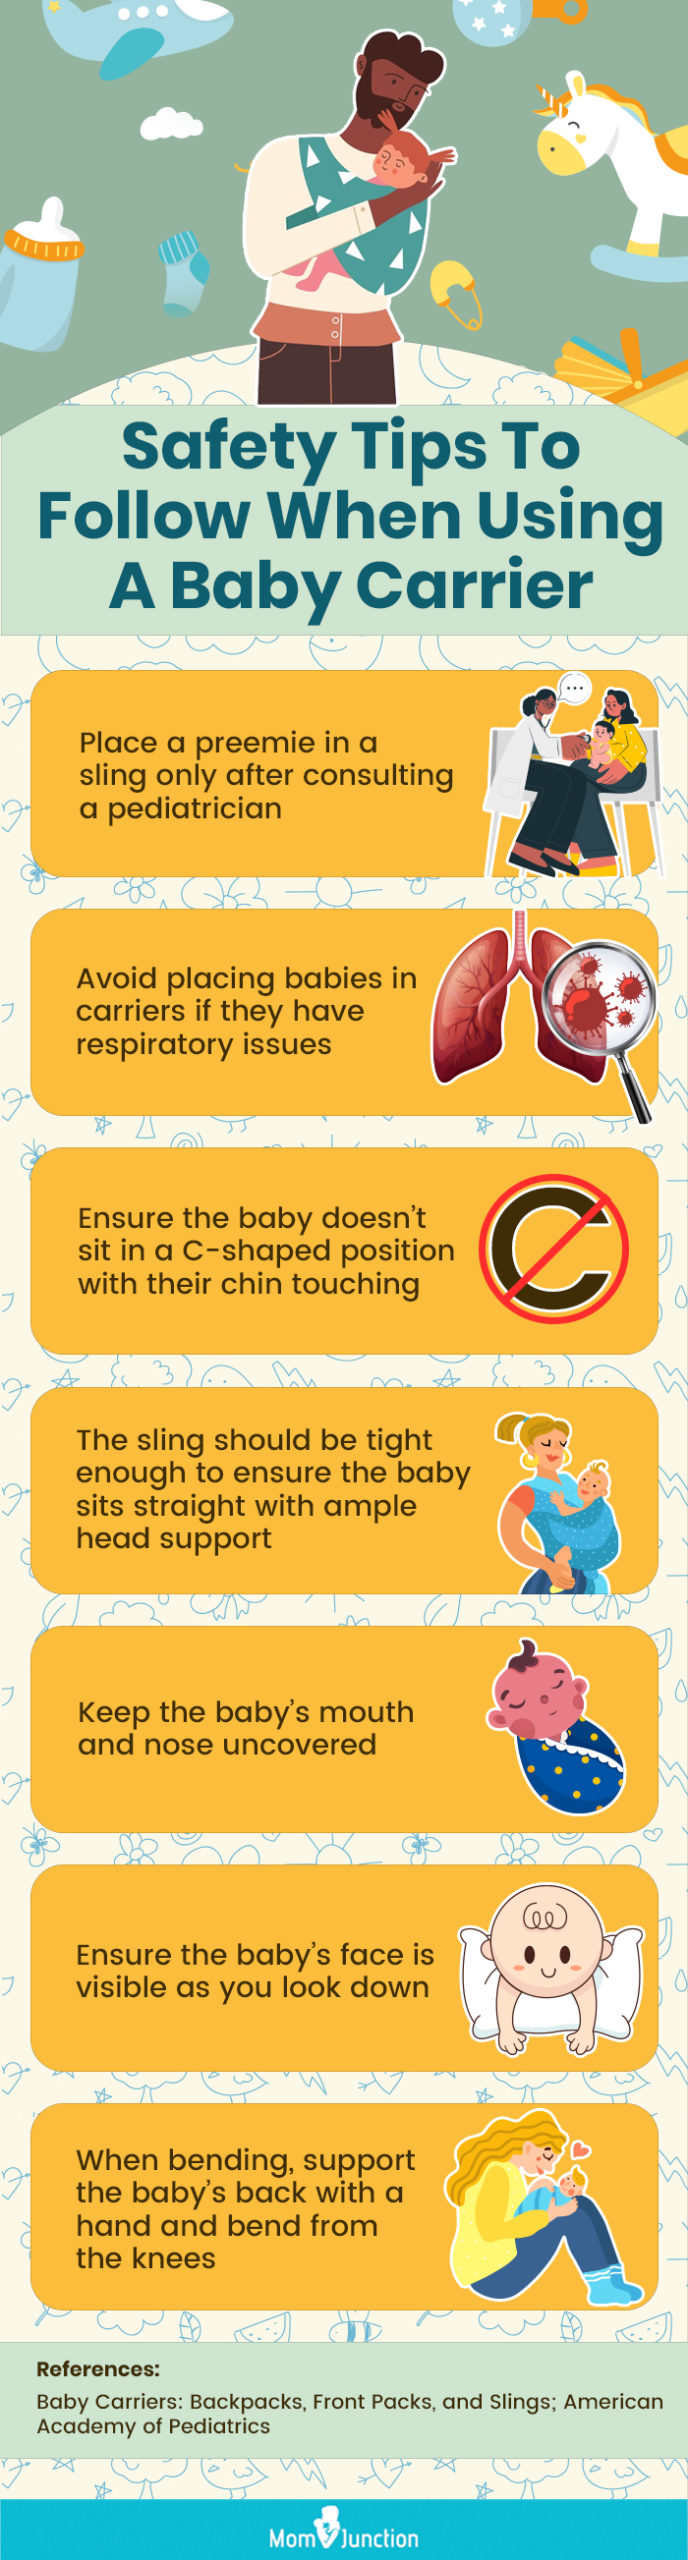 Safety Tips To Follow When Using A Baby Carrier (infographic)